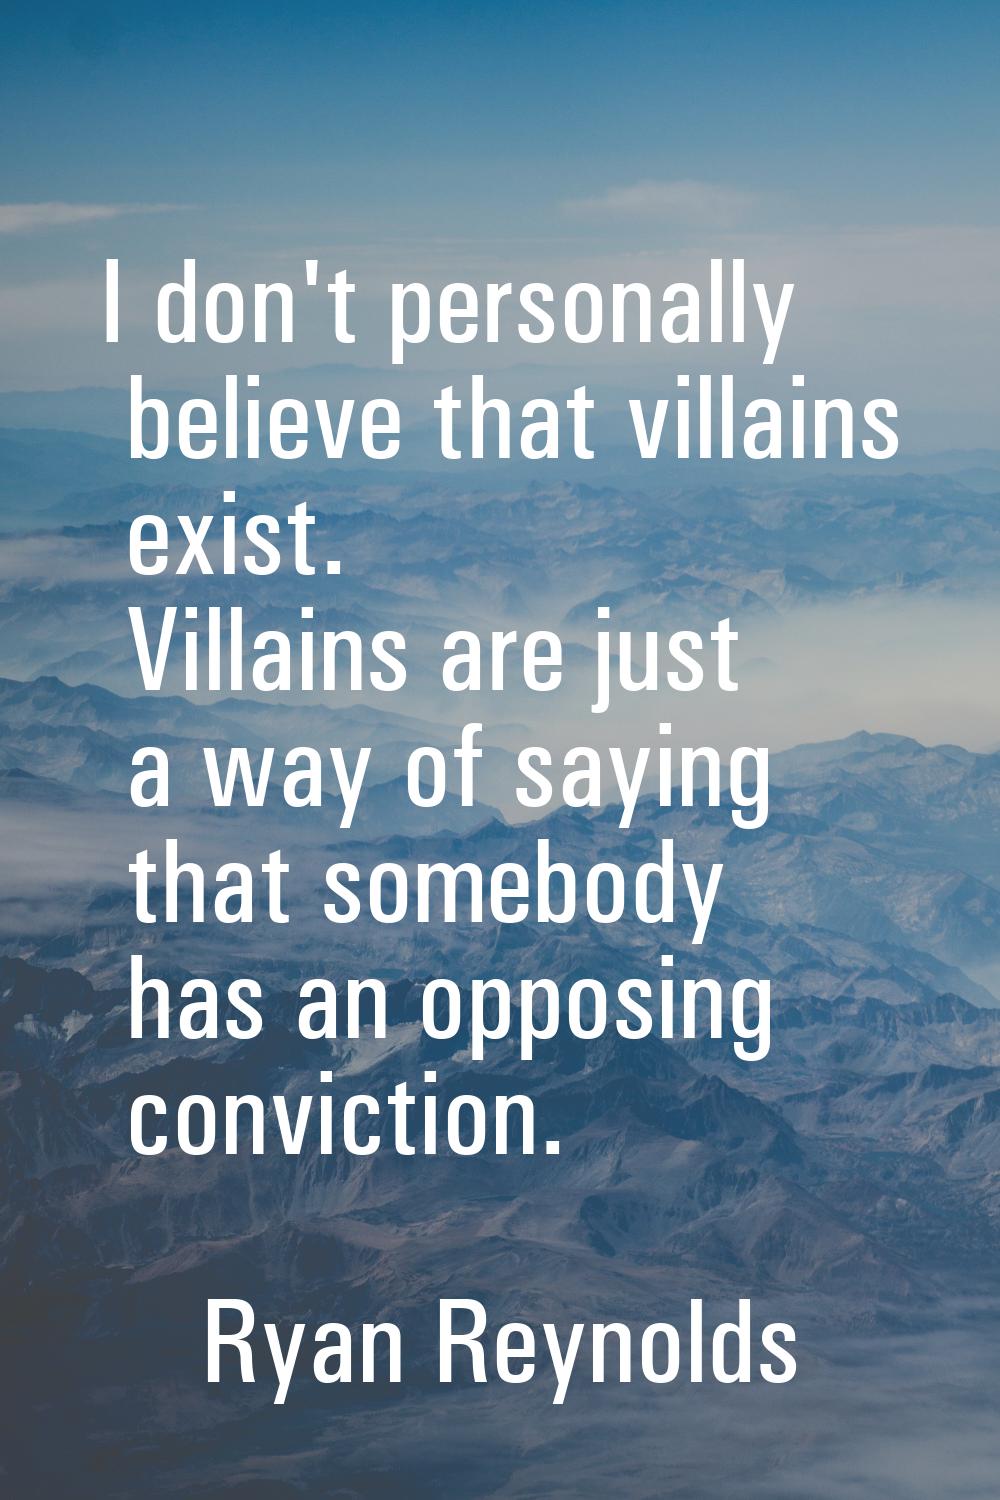 I don't personally believe that villains exist. Villains are just a way of saying that somebody has